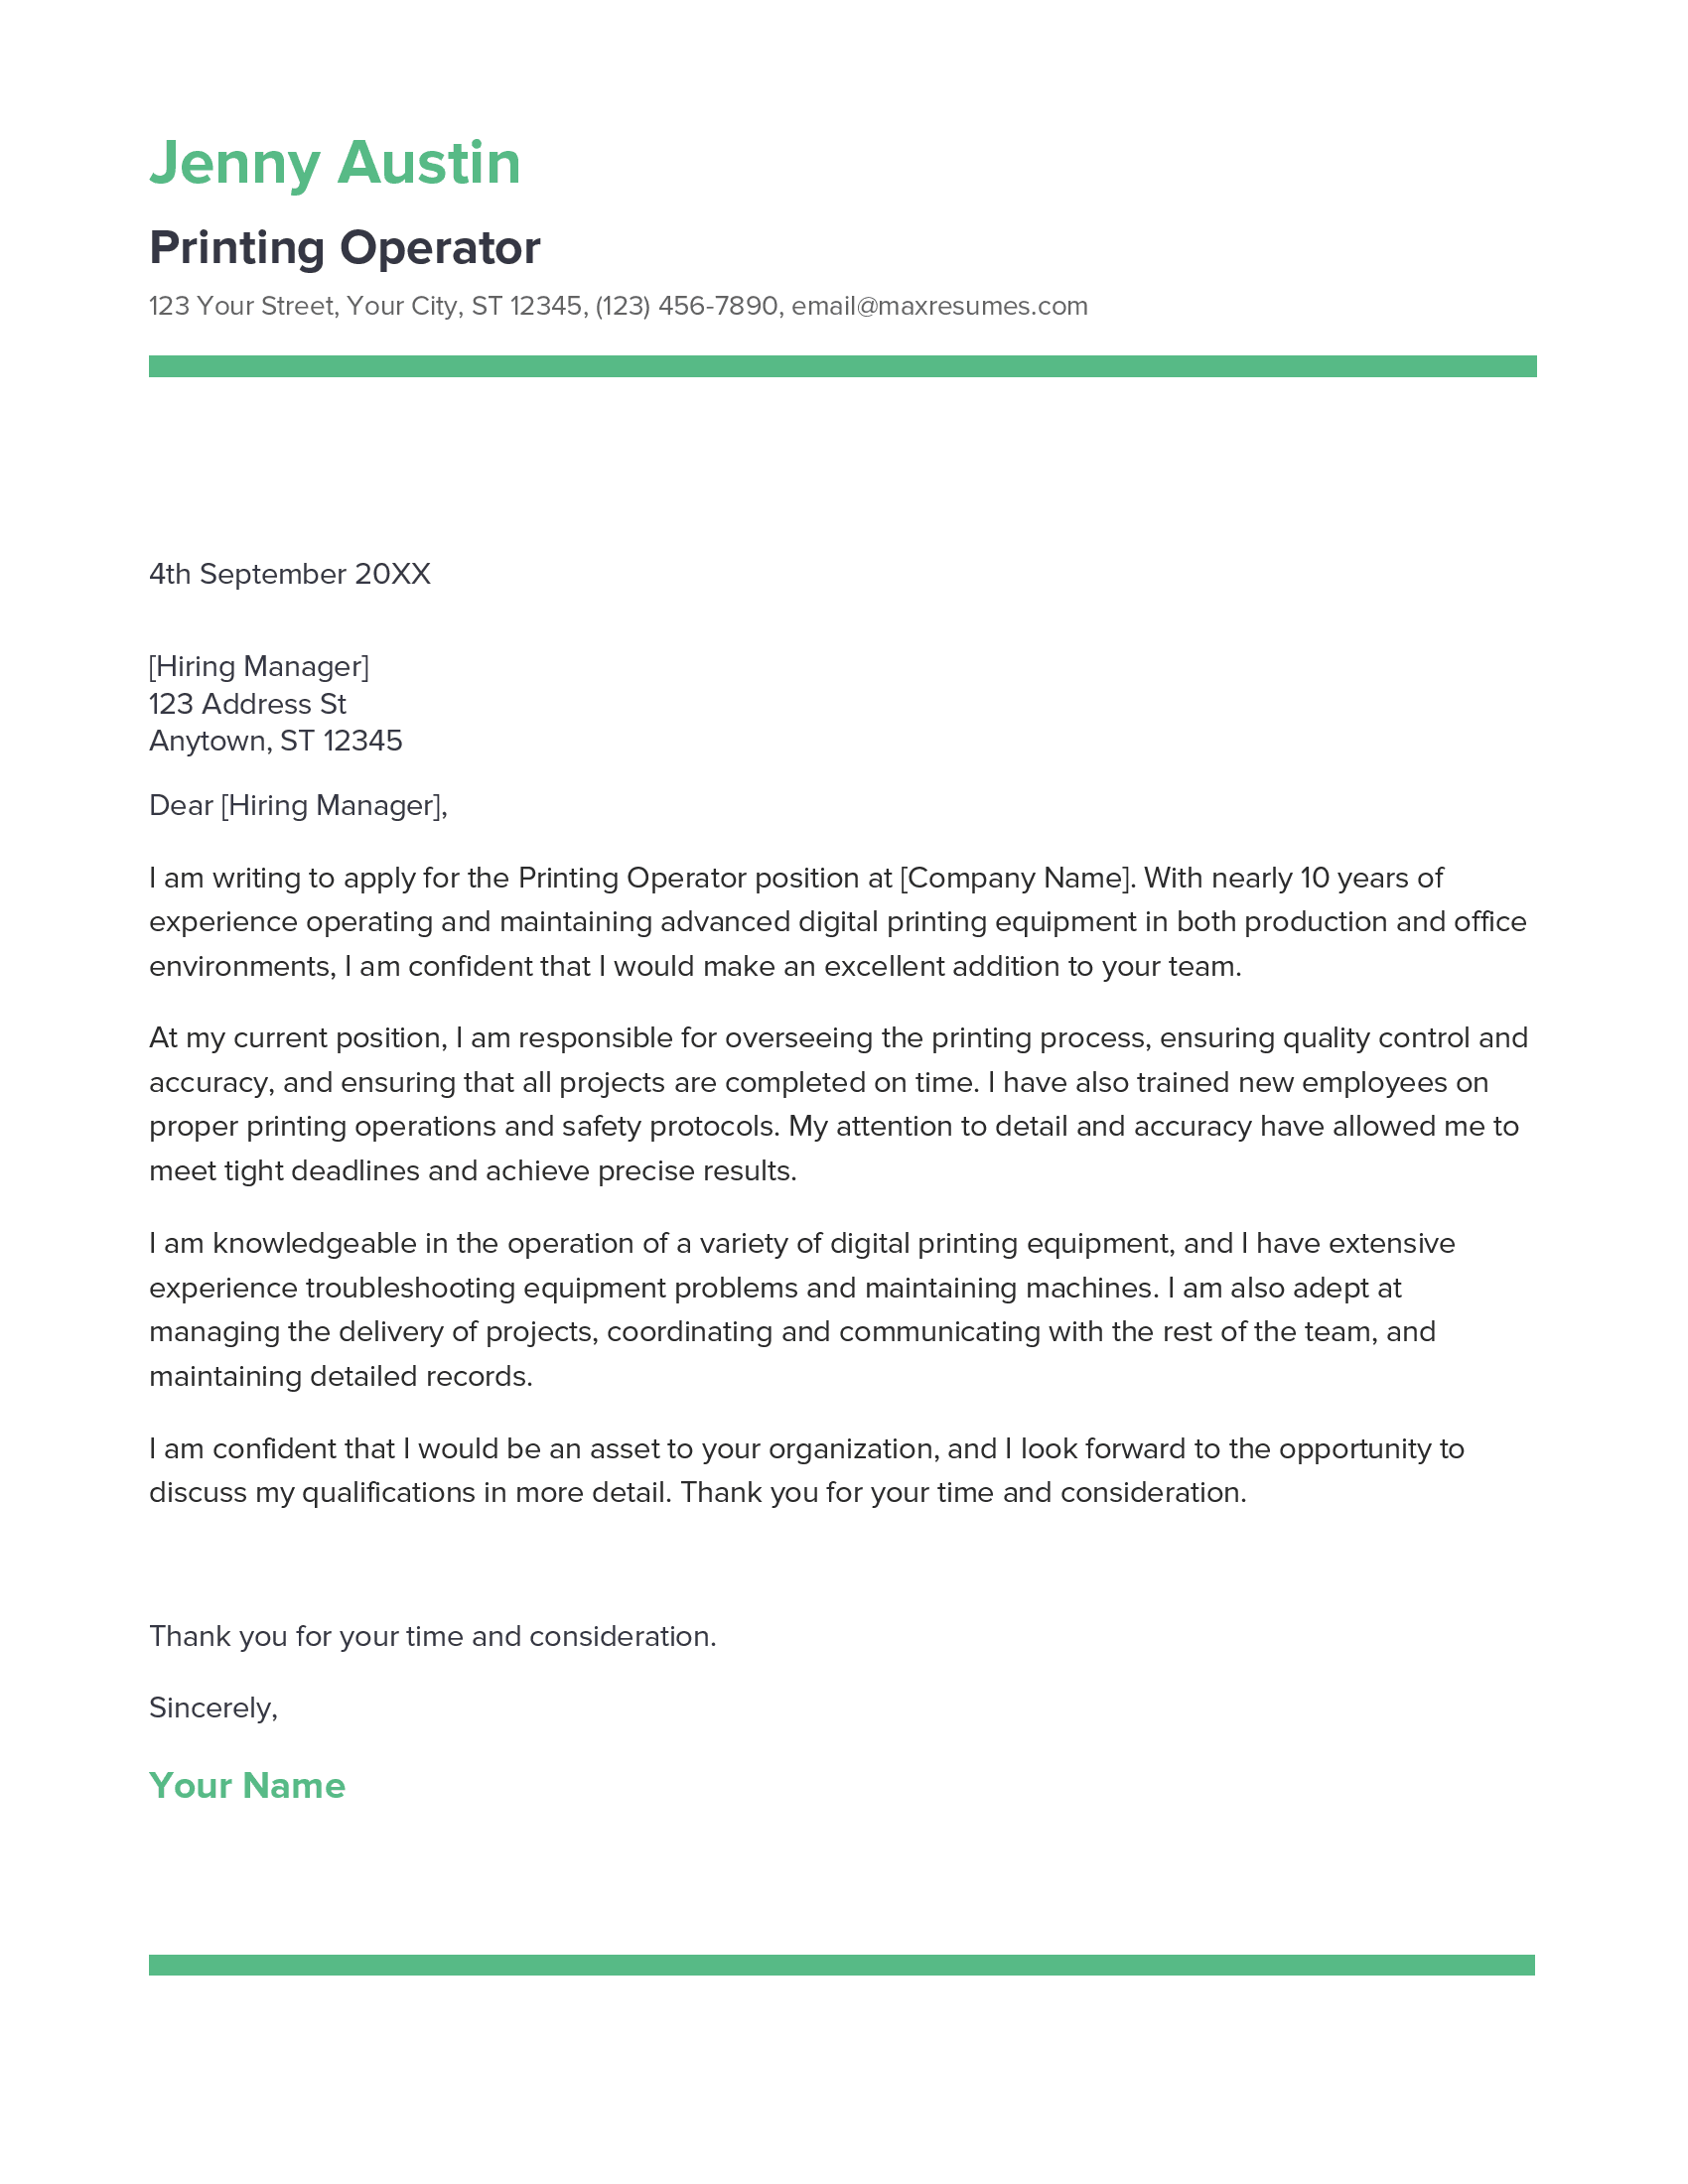 Printing Operator Cover Letter Example